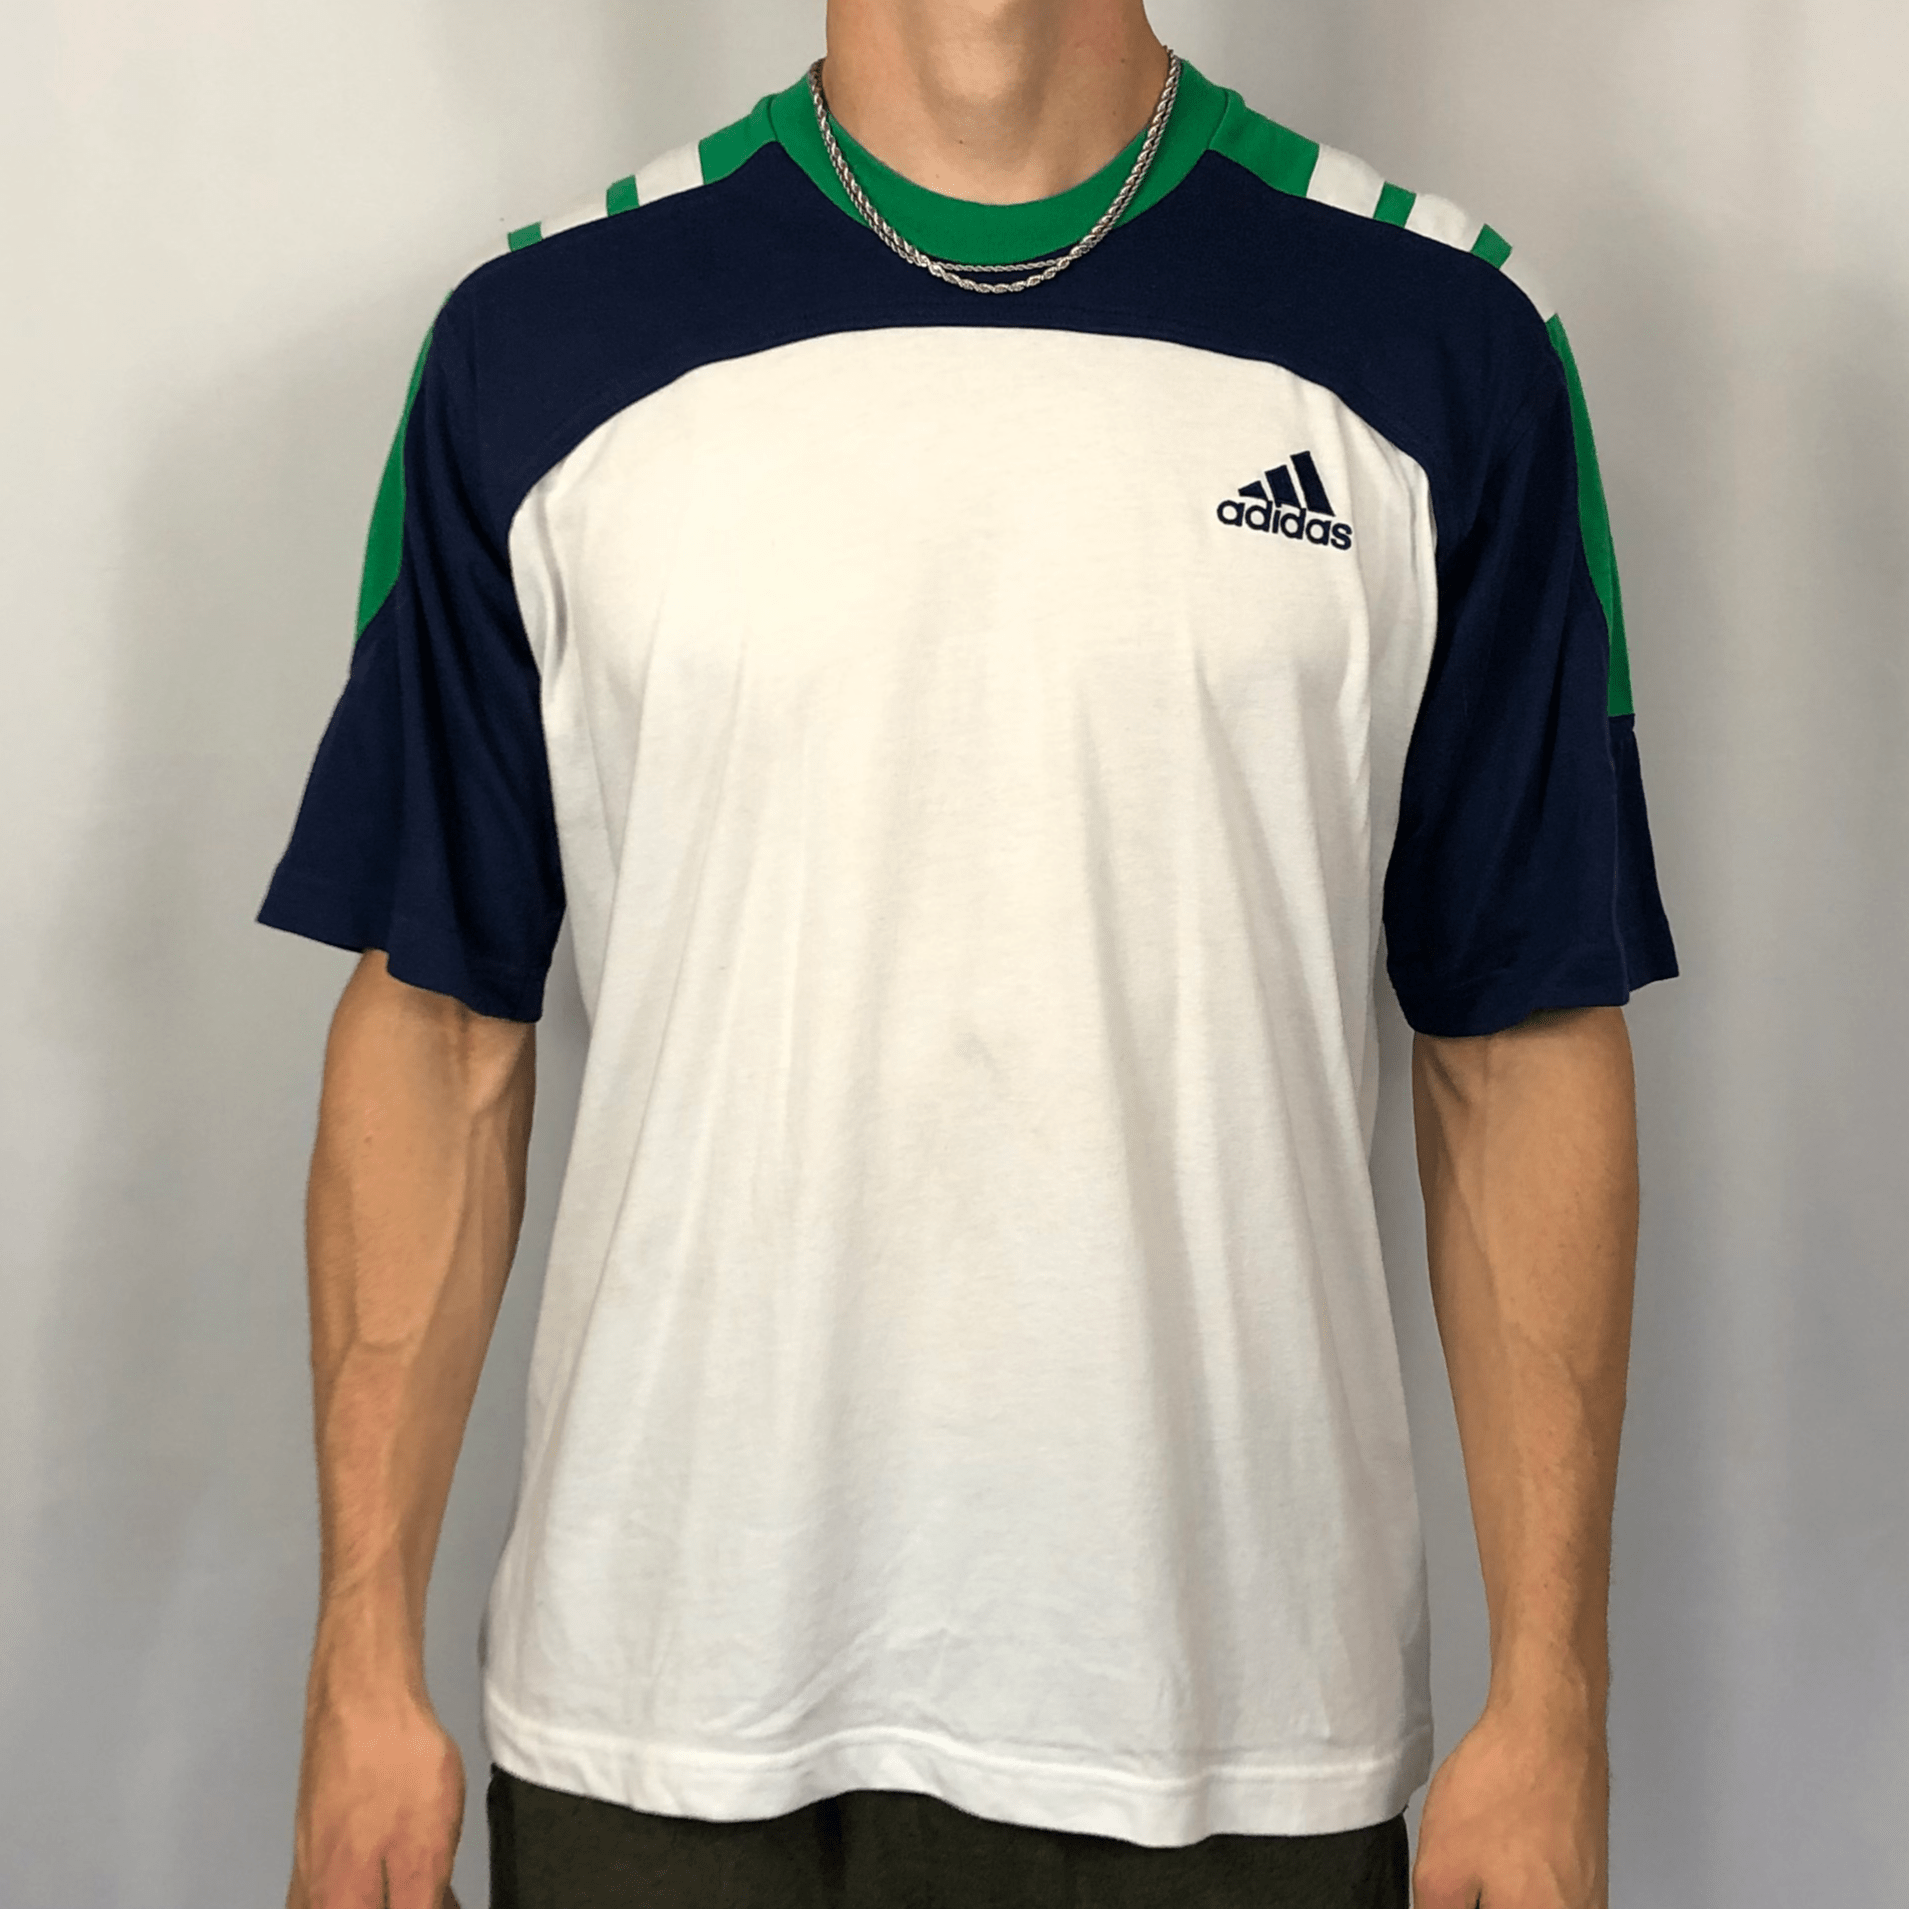 VINTAGE ADIDAS T-SHIRT IN Navy, Green & WHITE - LARGE - Vintique Clothing